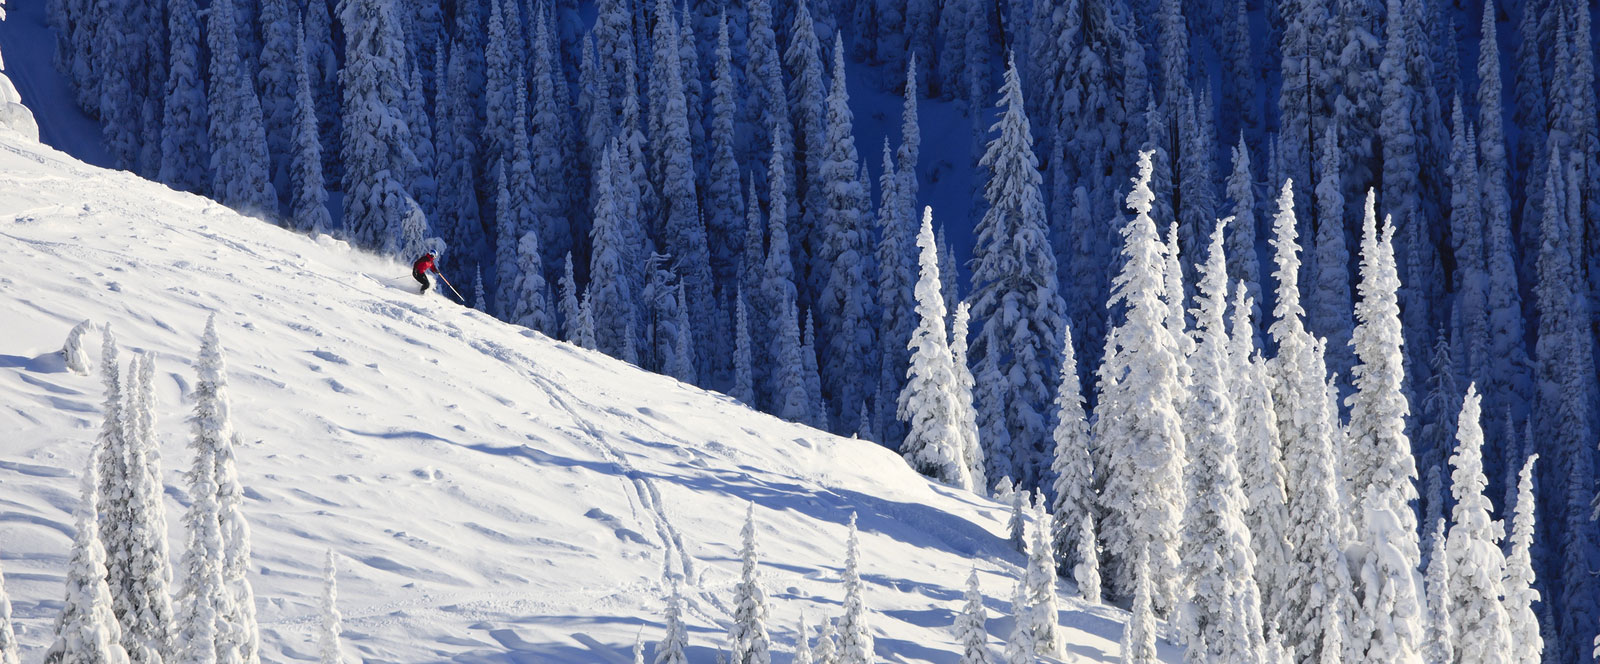 Holiday Festivities for Your Winter Trip to Big Sky